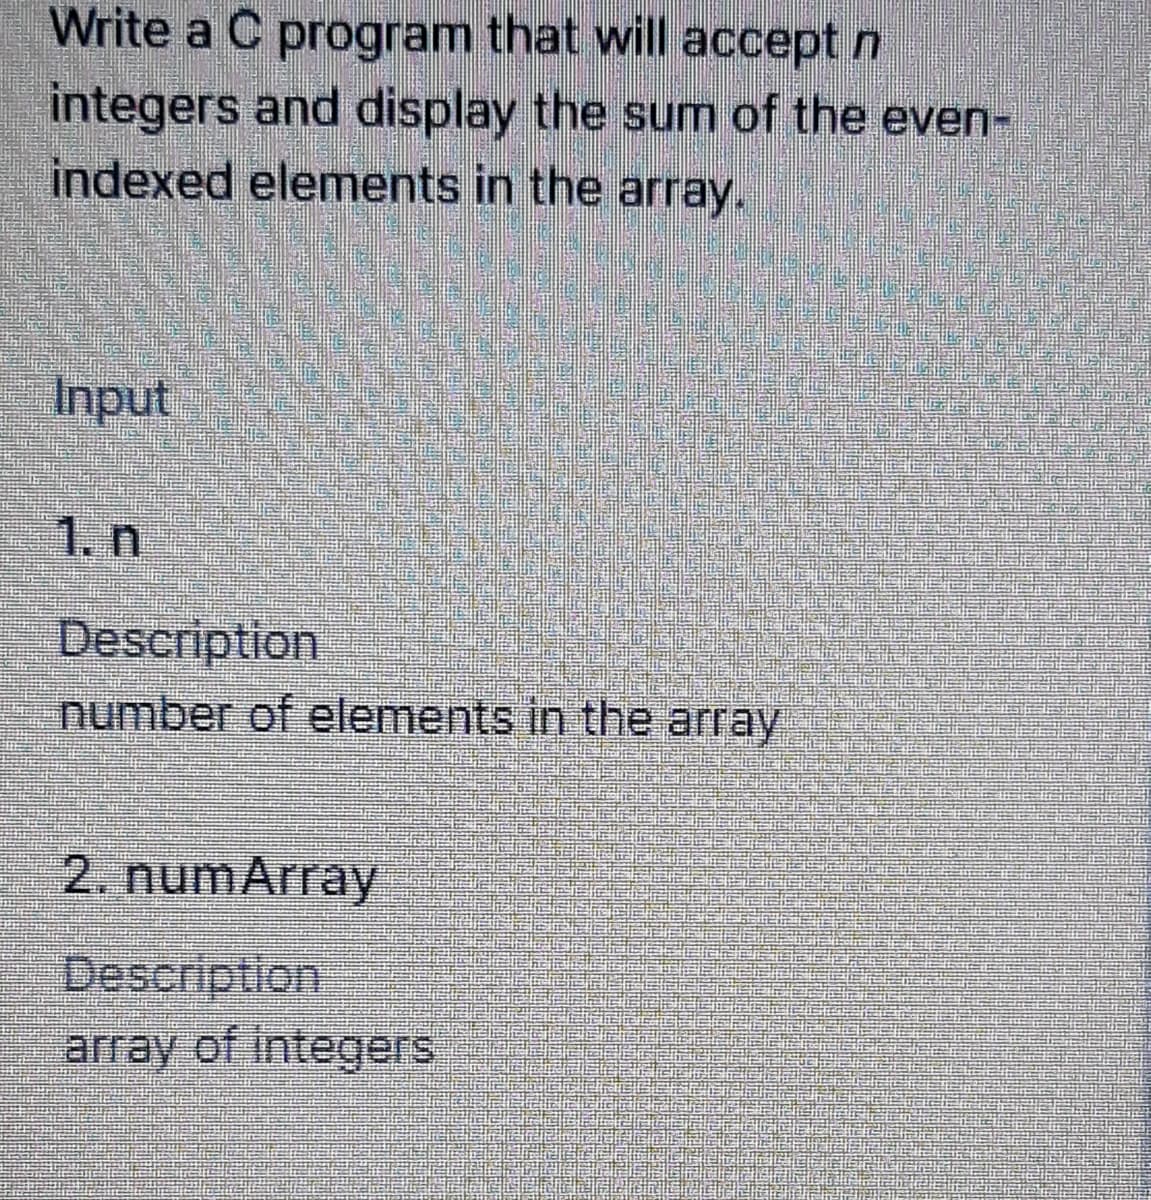 Write a C program that will accept n
integers and display the sum of the even-
indexed elements in the array.
Input
1. n
Description
number of elements in the array
2. numArray
Description
array of integers
